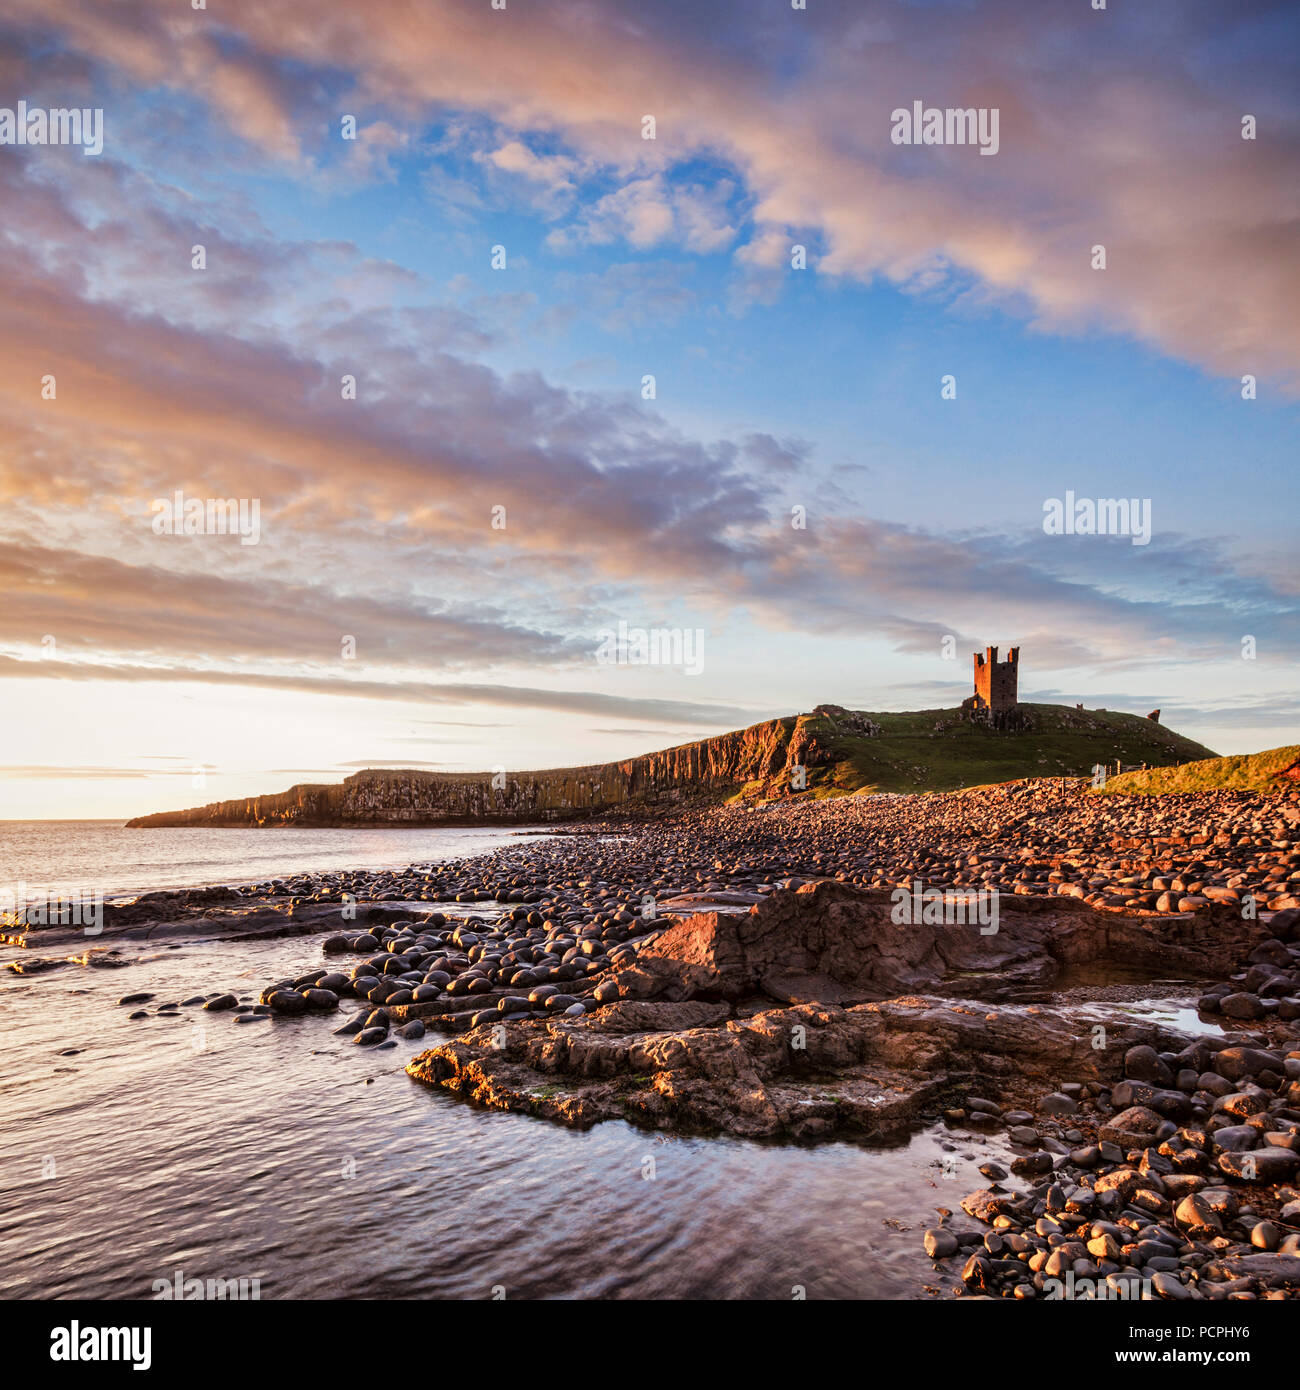 Dunstanburgh Castle, now a ruin, commanding the beach at Embleton Bay, Northumberland, England, under a dramatic dawn sky. Stock Photo